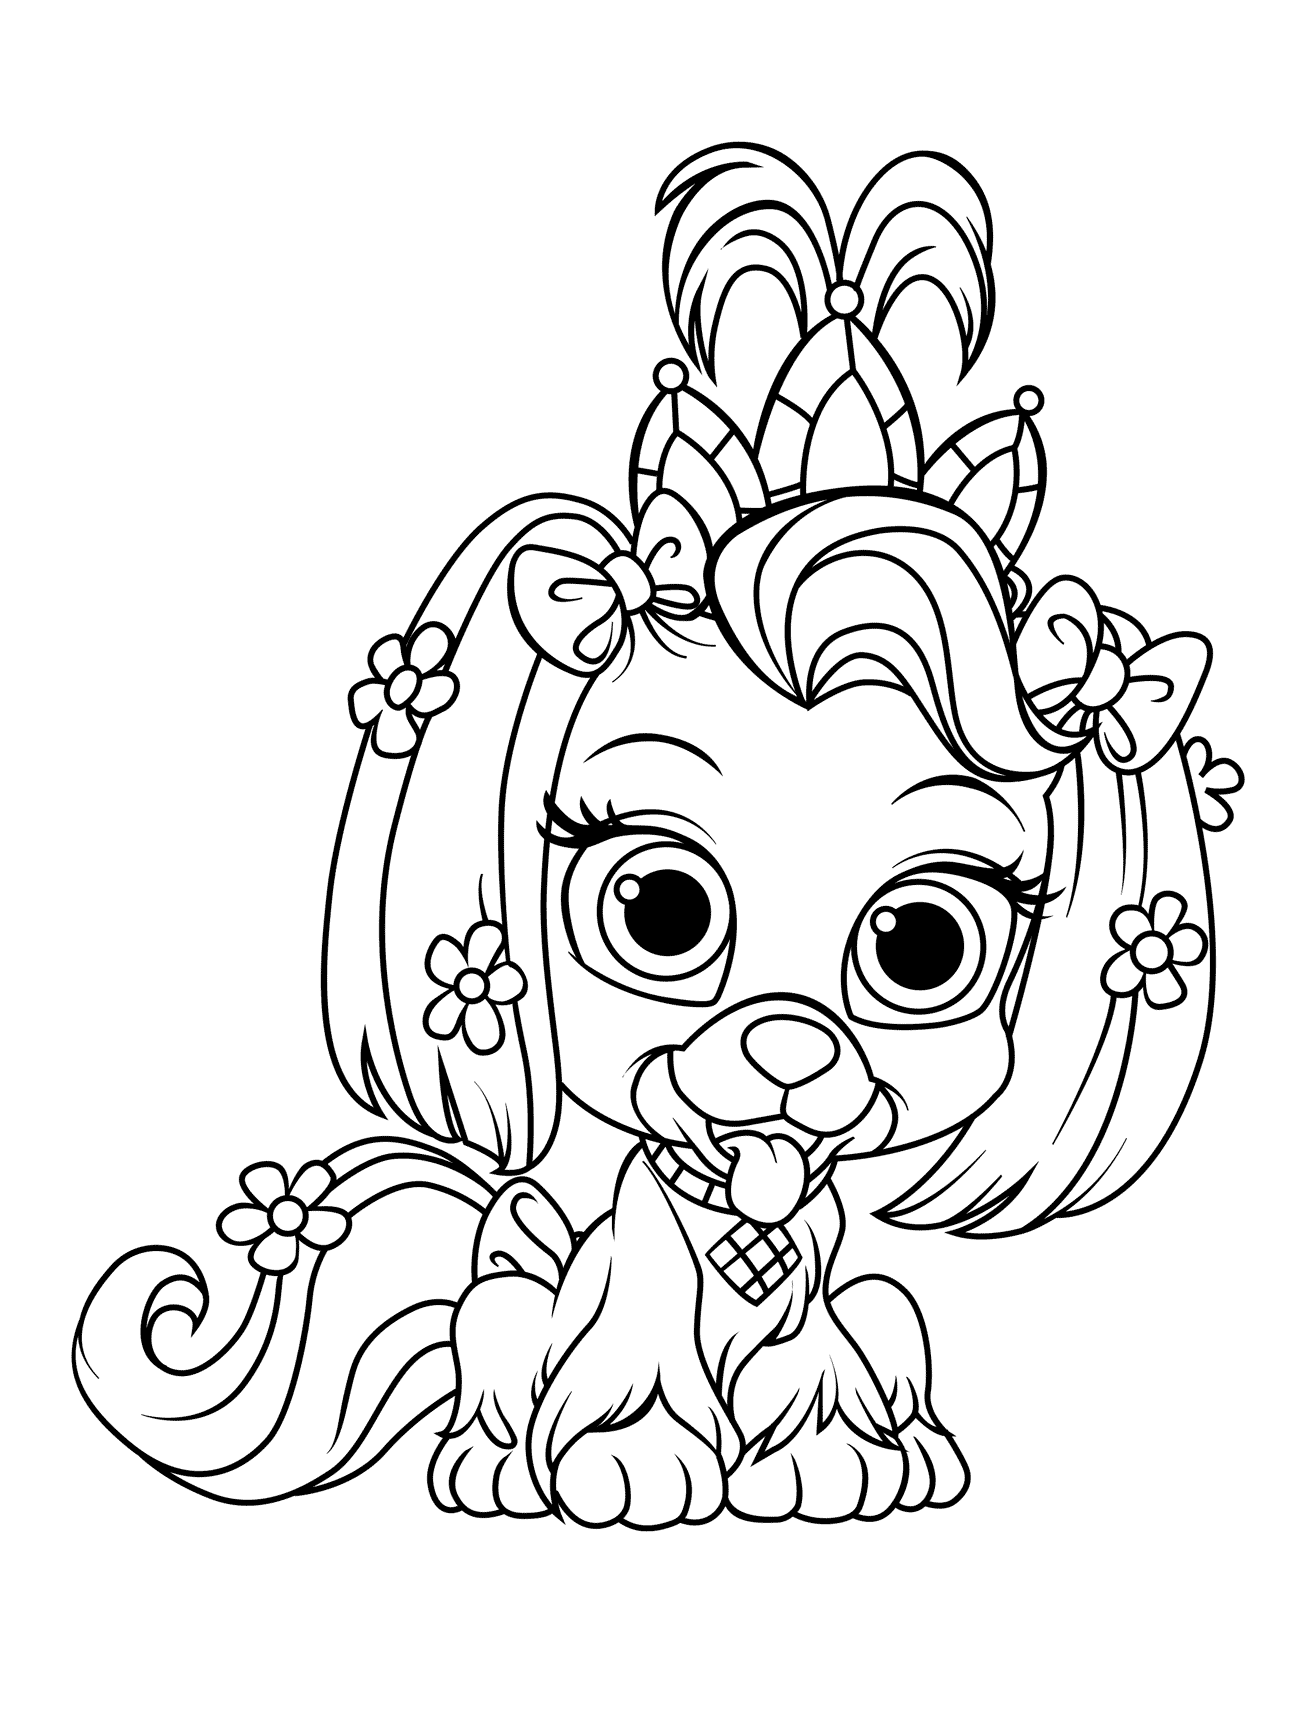 Coloring page - Puppy Chamomile